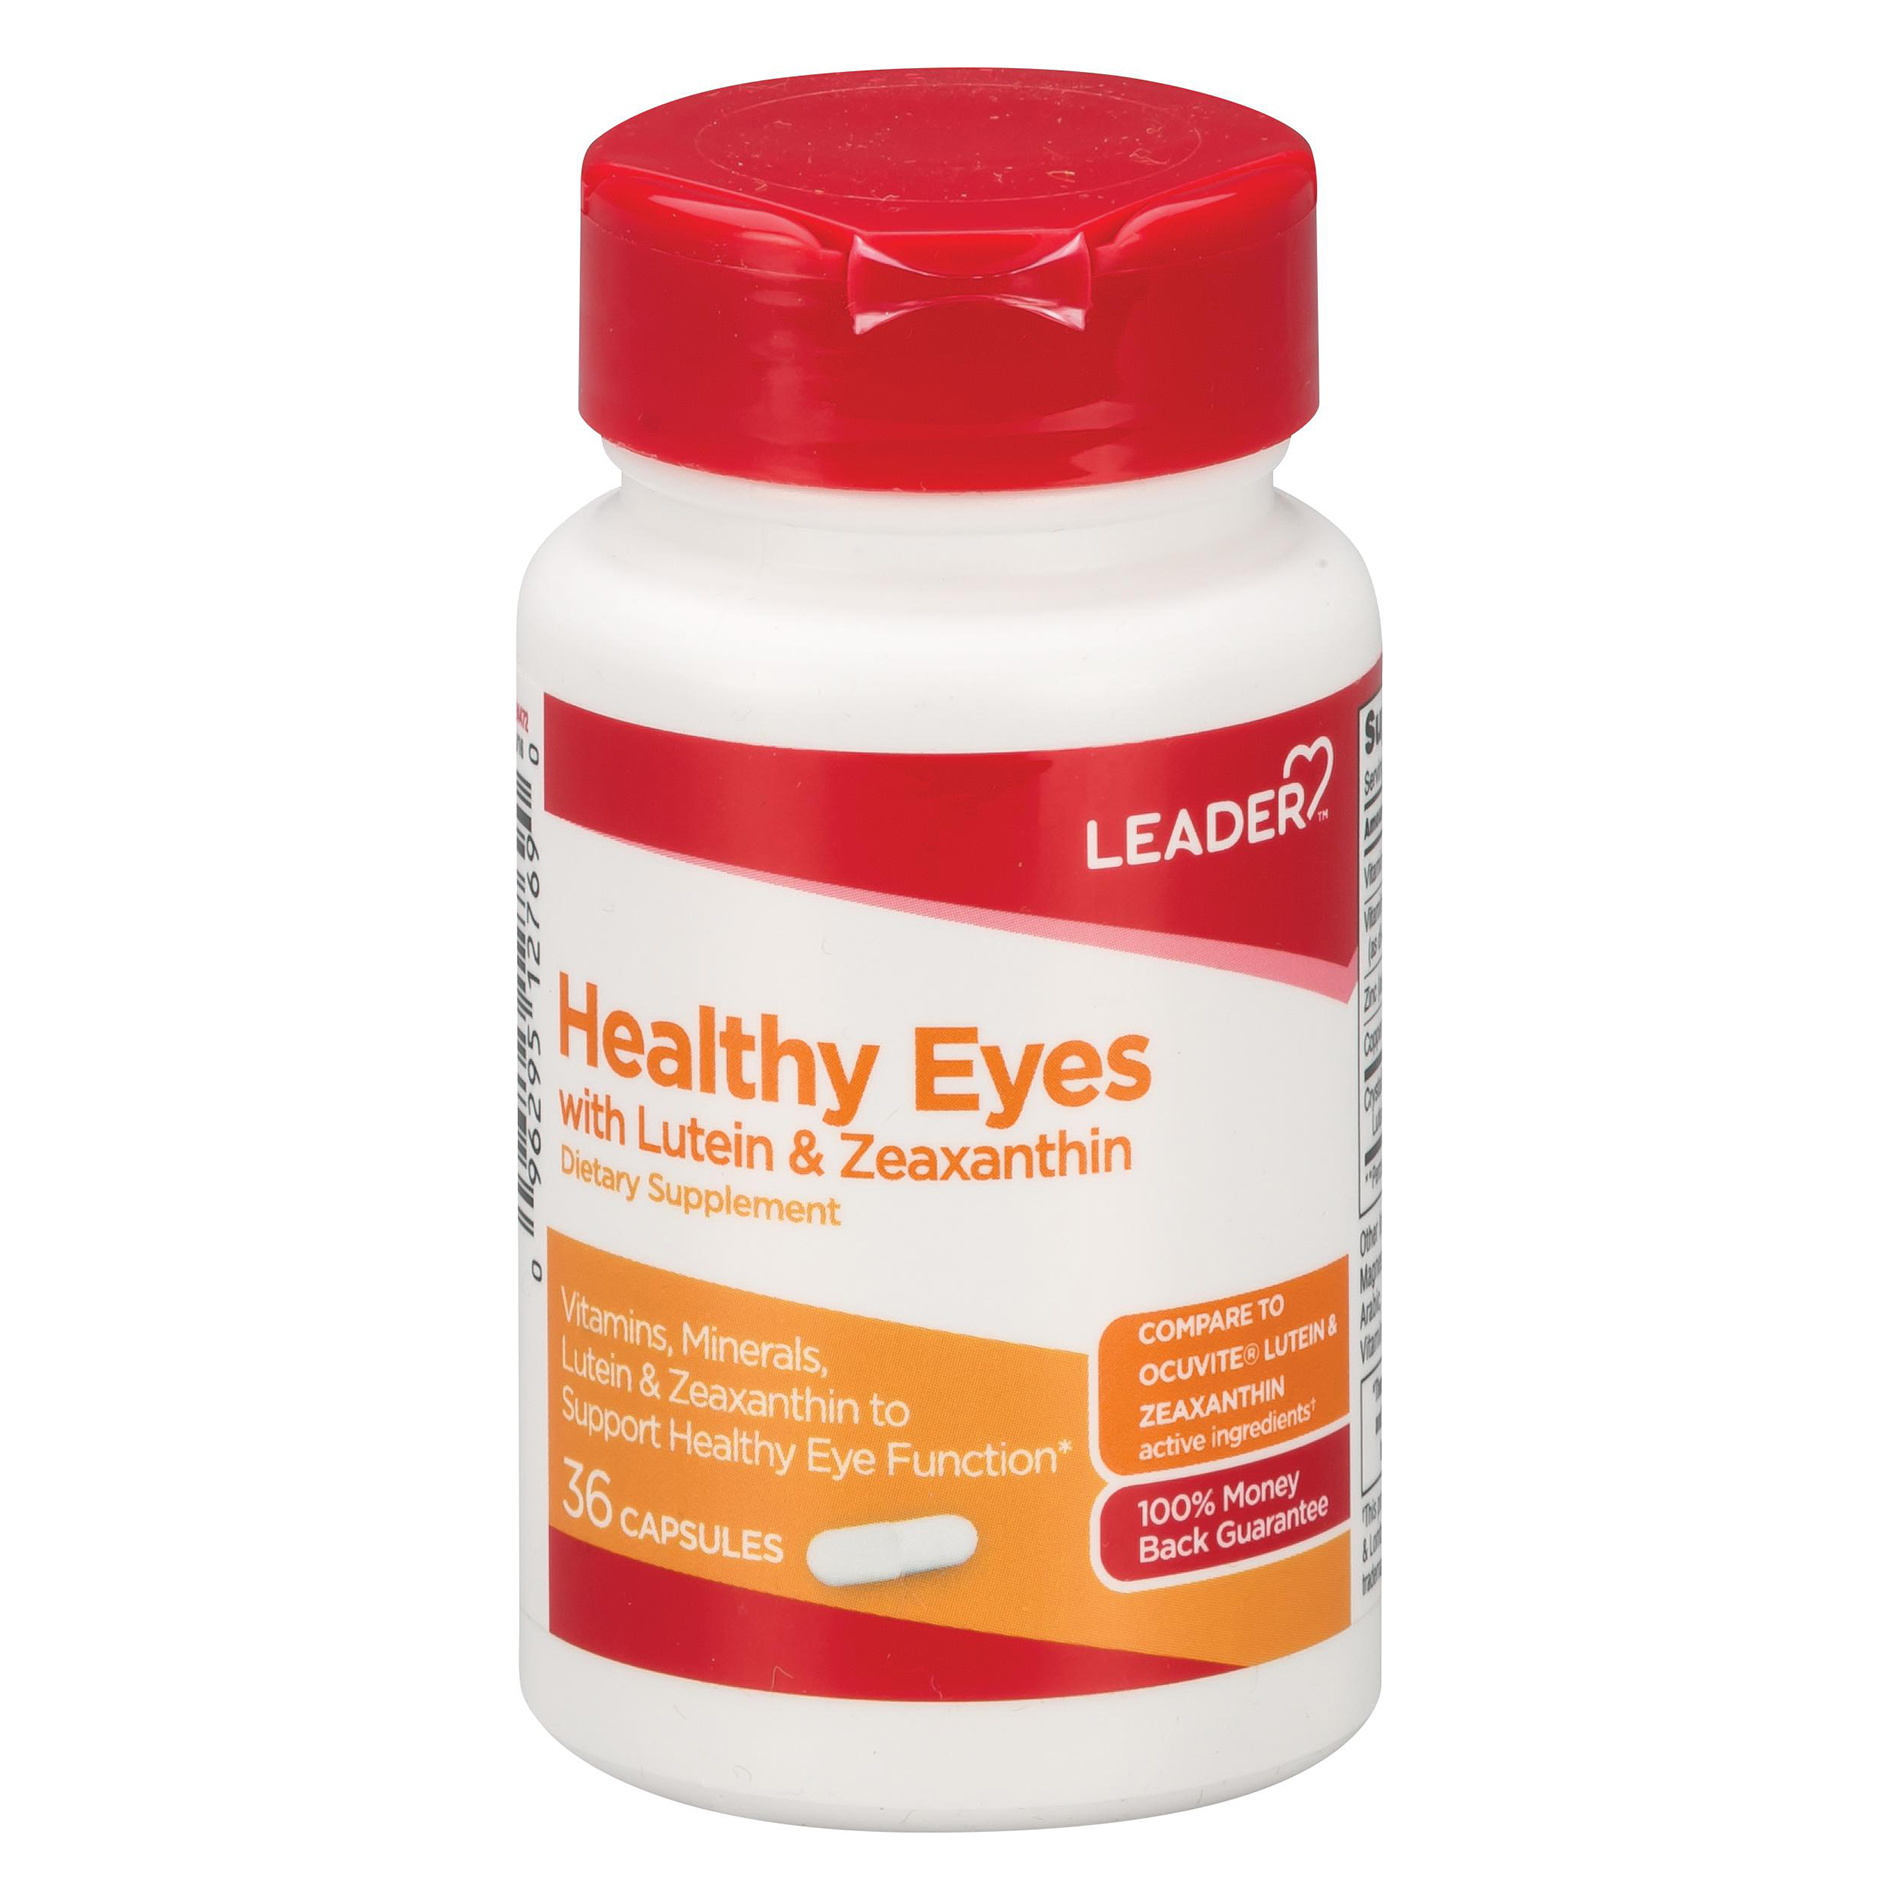 Leader Healthy Eyes with Lutein and Zeaxanthin Capsules - 36 Count